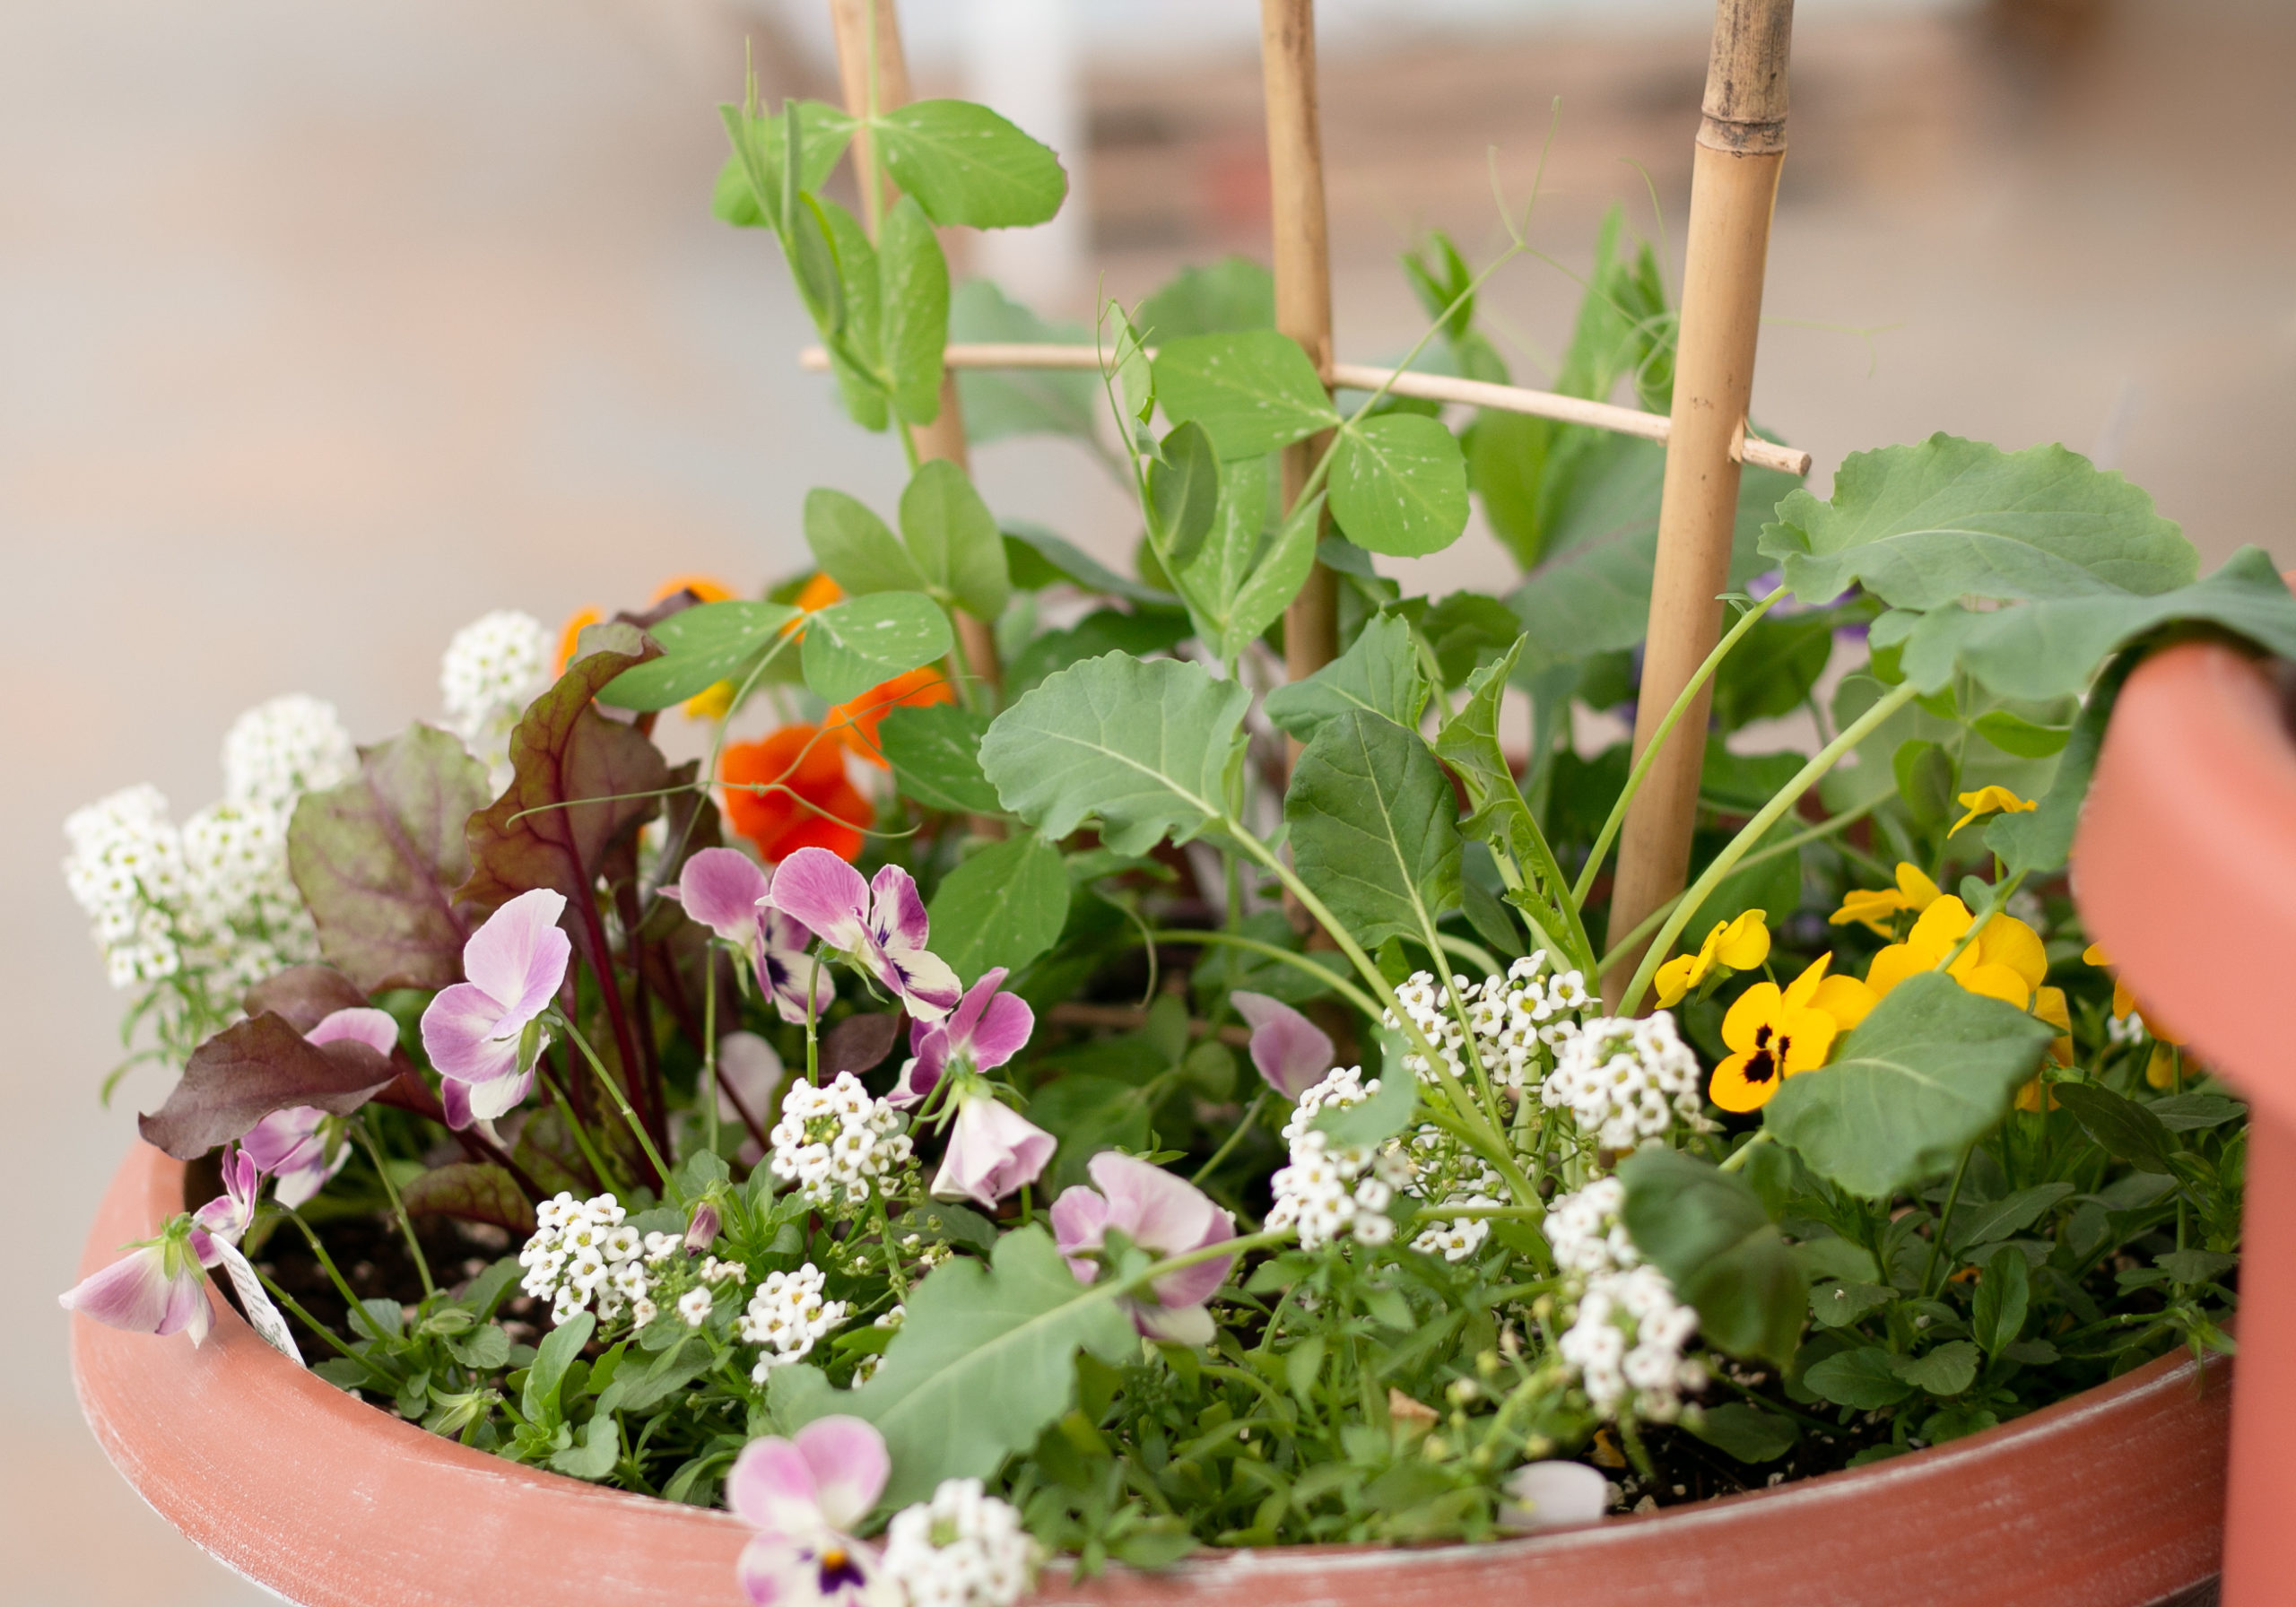 Violas, Allysum, Beets, Kale, Sweet Peas, and more are growing happily in one container garden